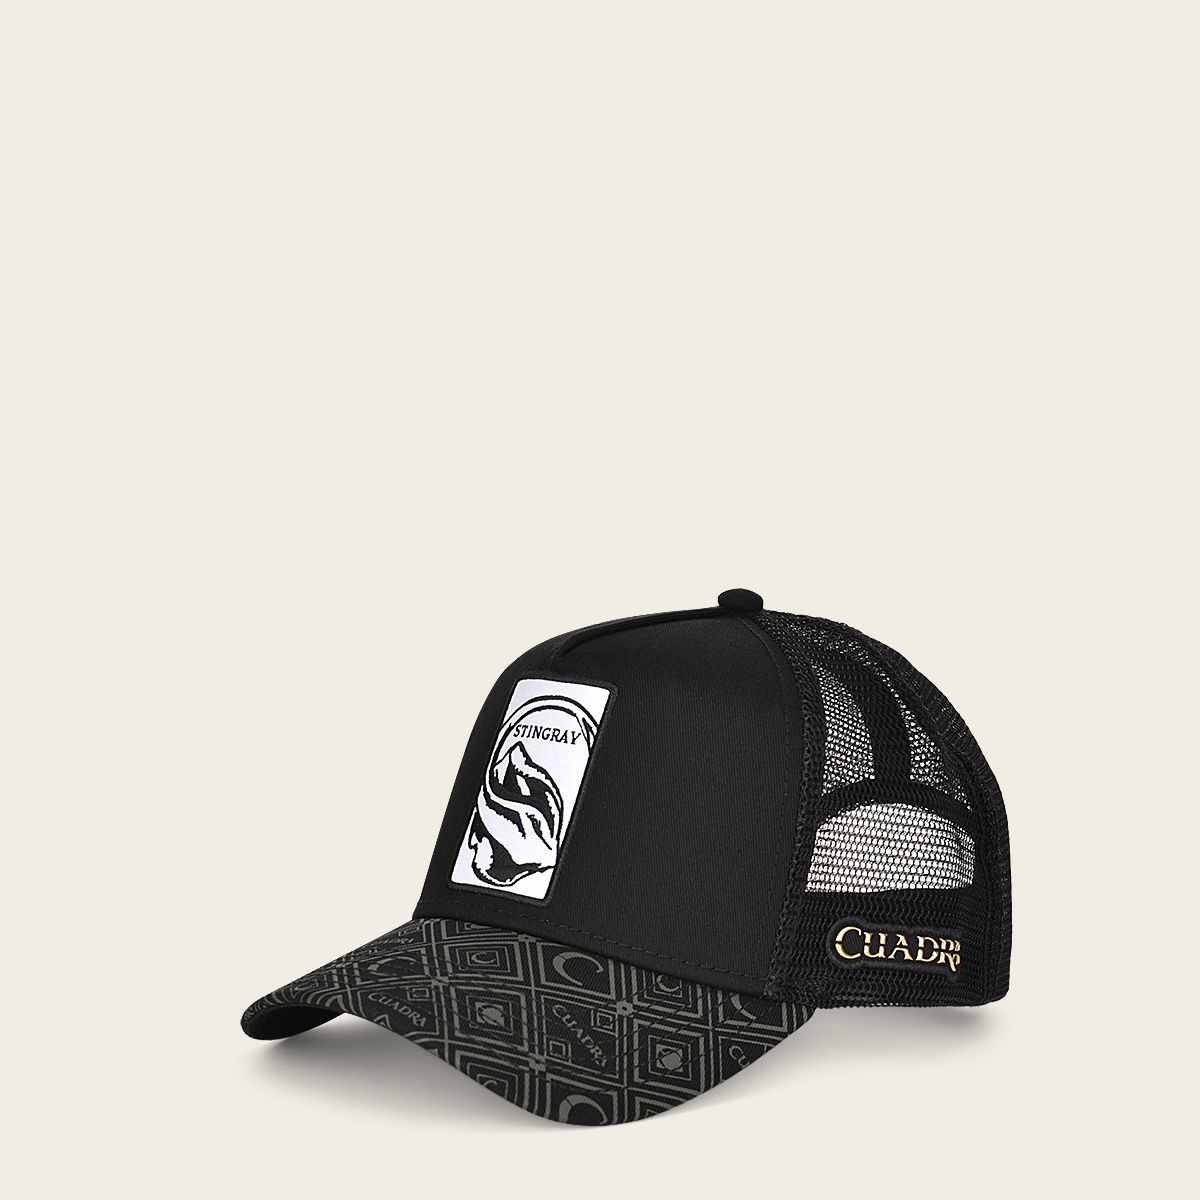 Cuadra black cap with embroidery stingray patch